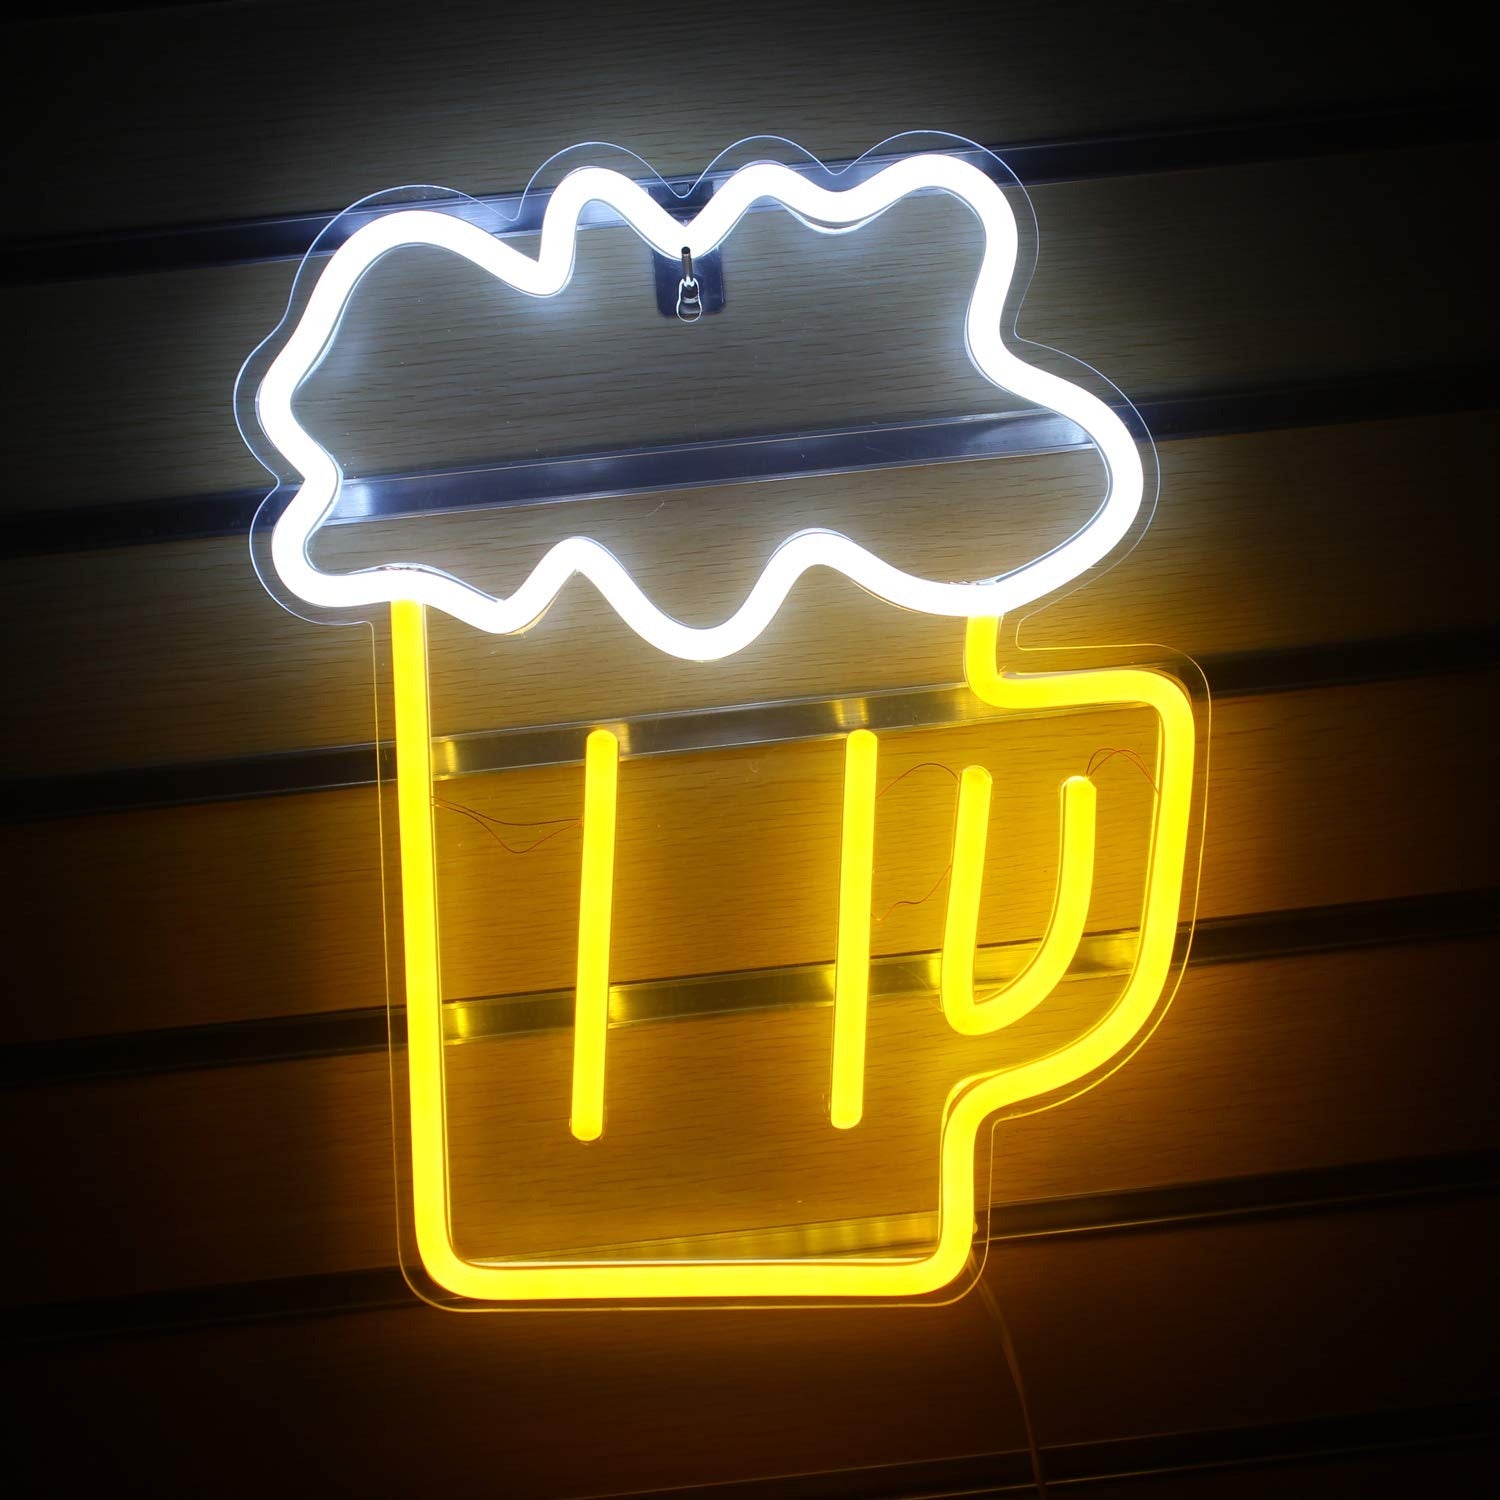  "Beer" opening LED neon sign